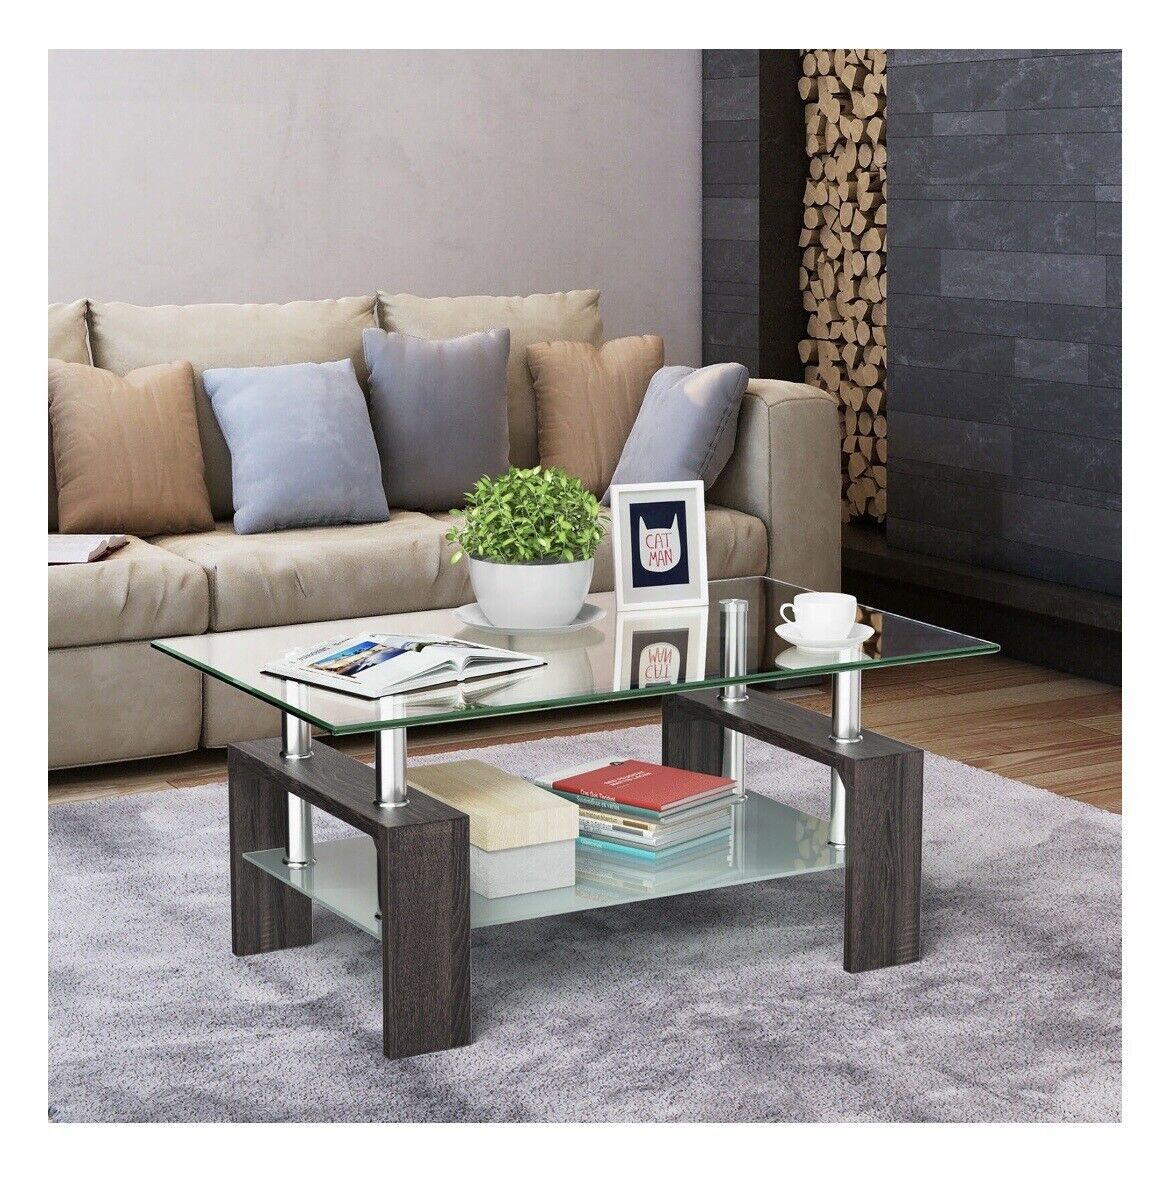 Wood Tempered Glass Top Coffee Table Rectangular W/ Shelf Home Furniture |  Ebay Throughout Wood Tempered Glass Top Coffee Tables (Photo 13 of 15)